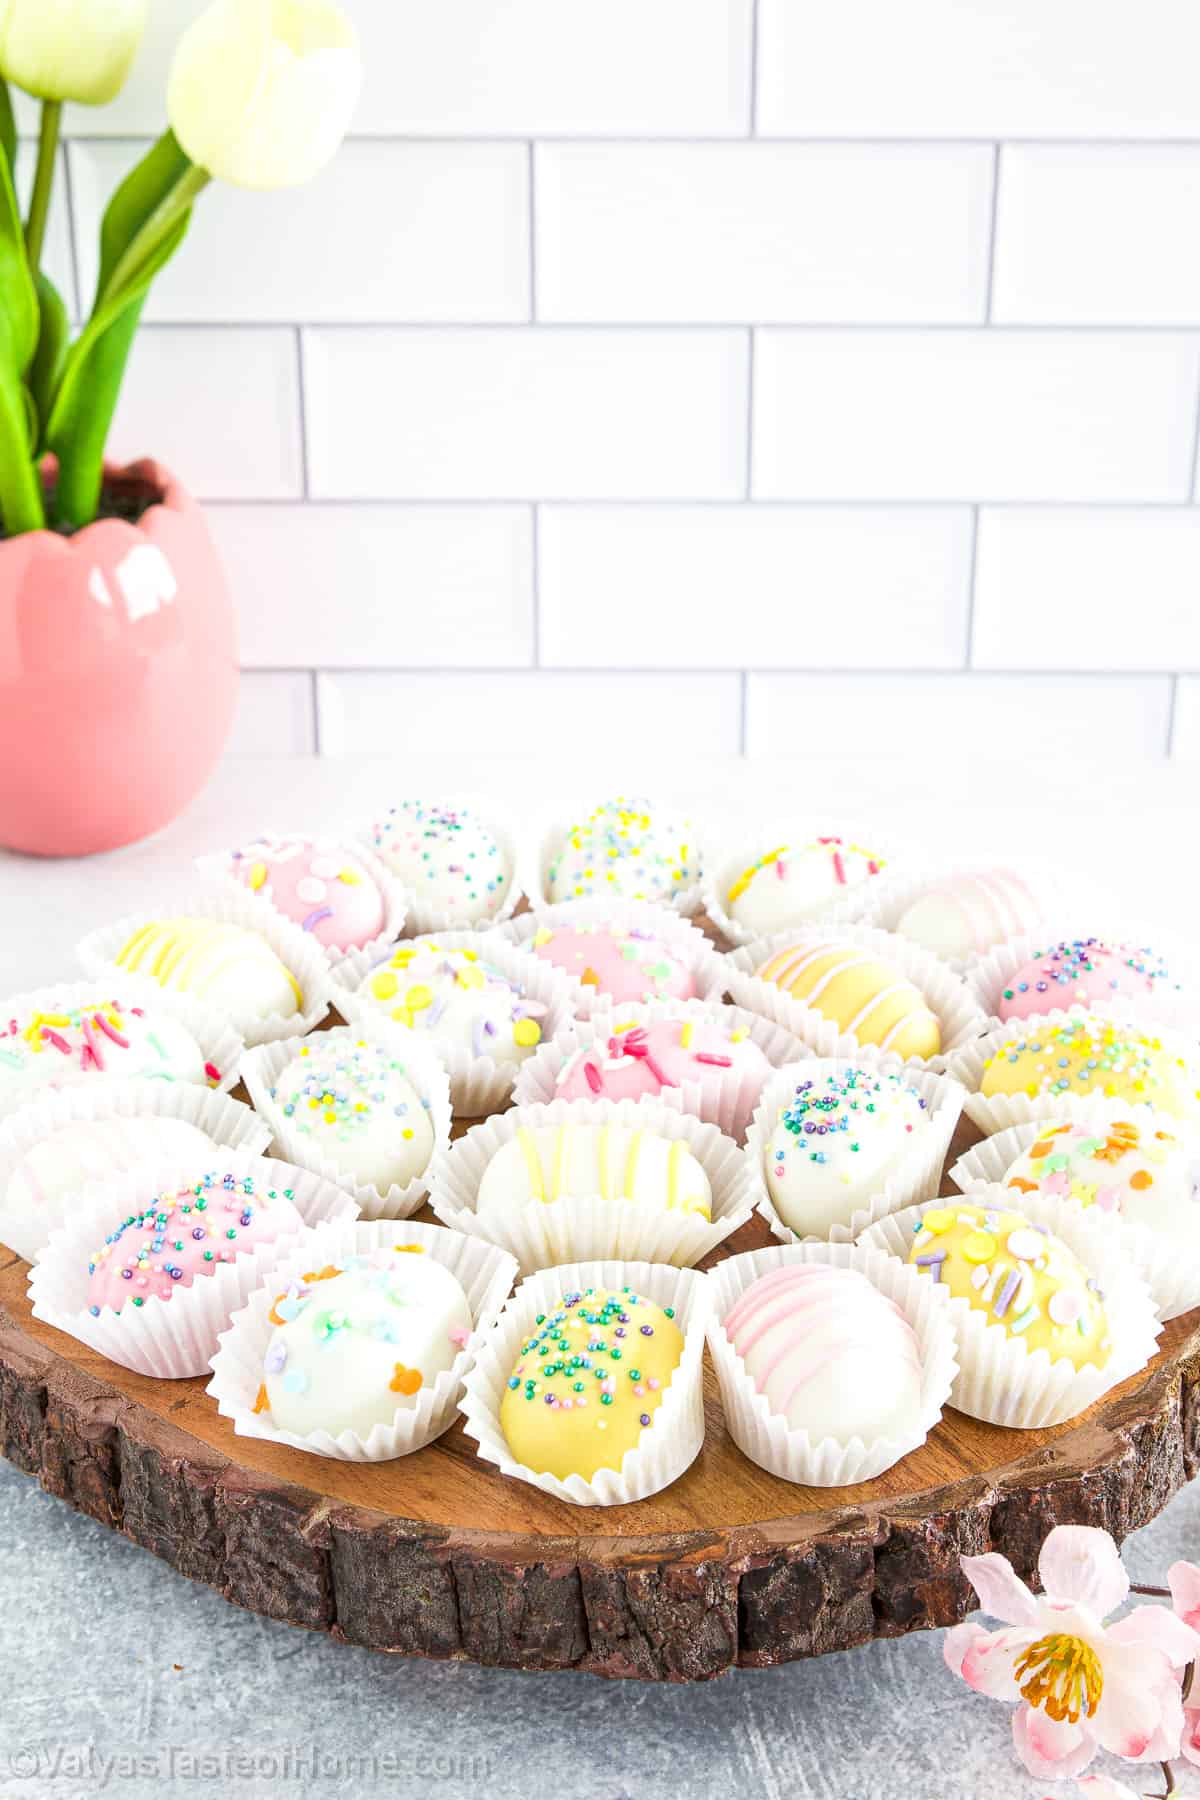 These super cute egg-shaped Easter egg Oreo truffles are the perfect holiday project.